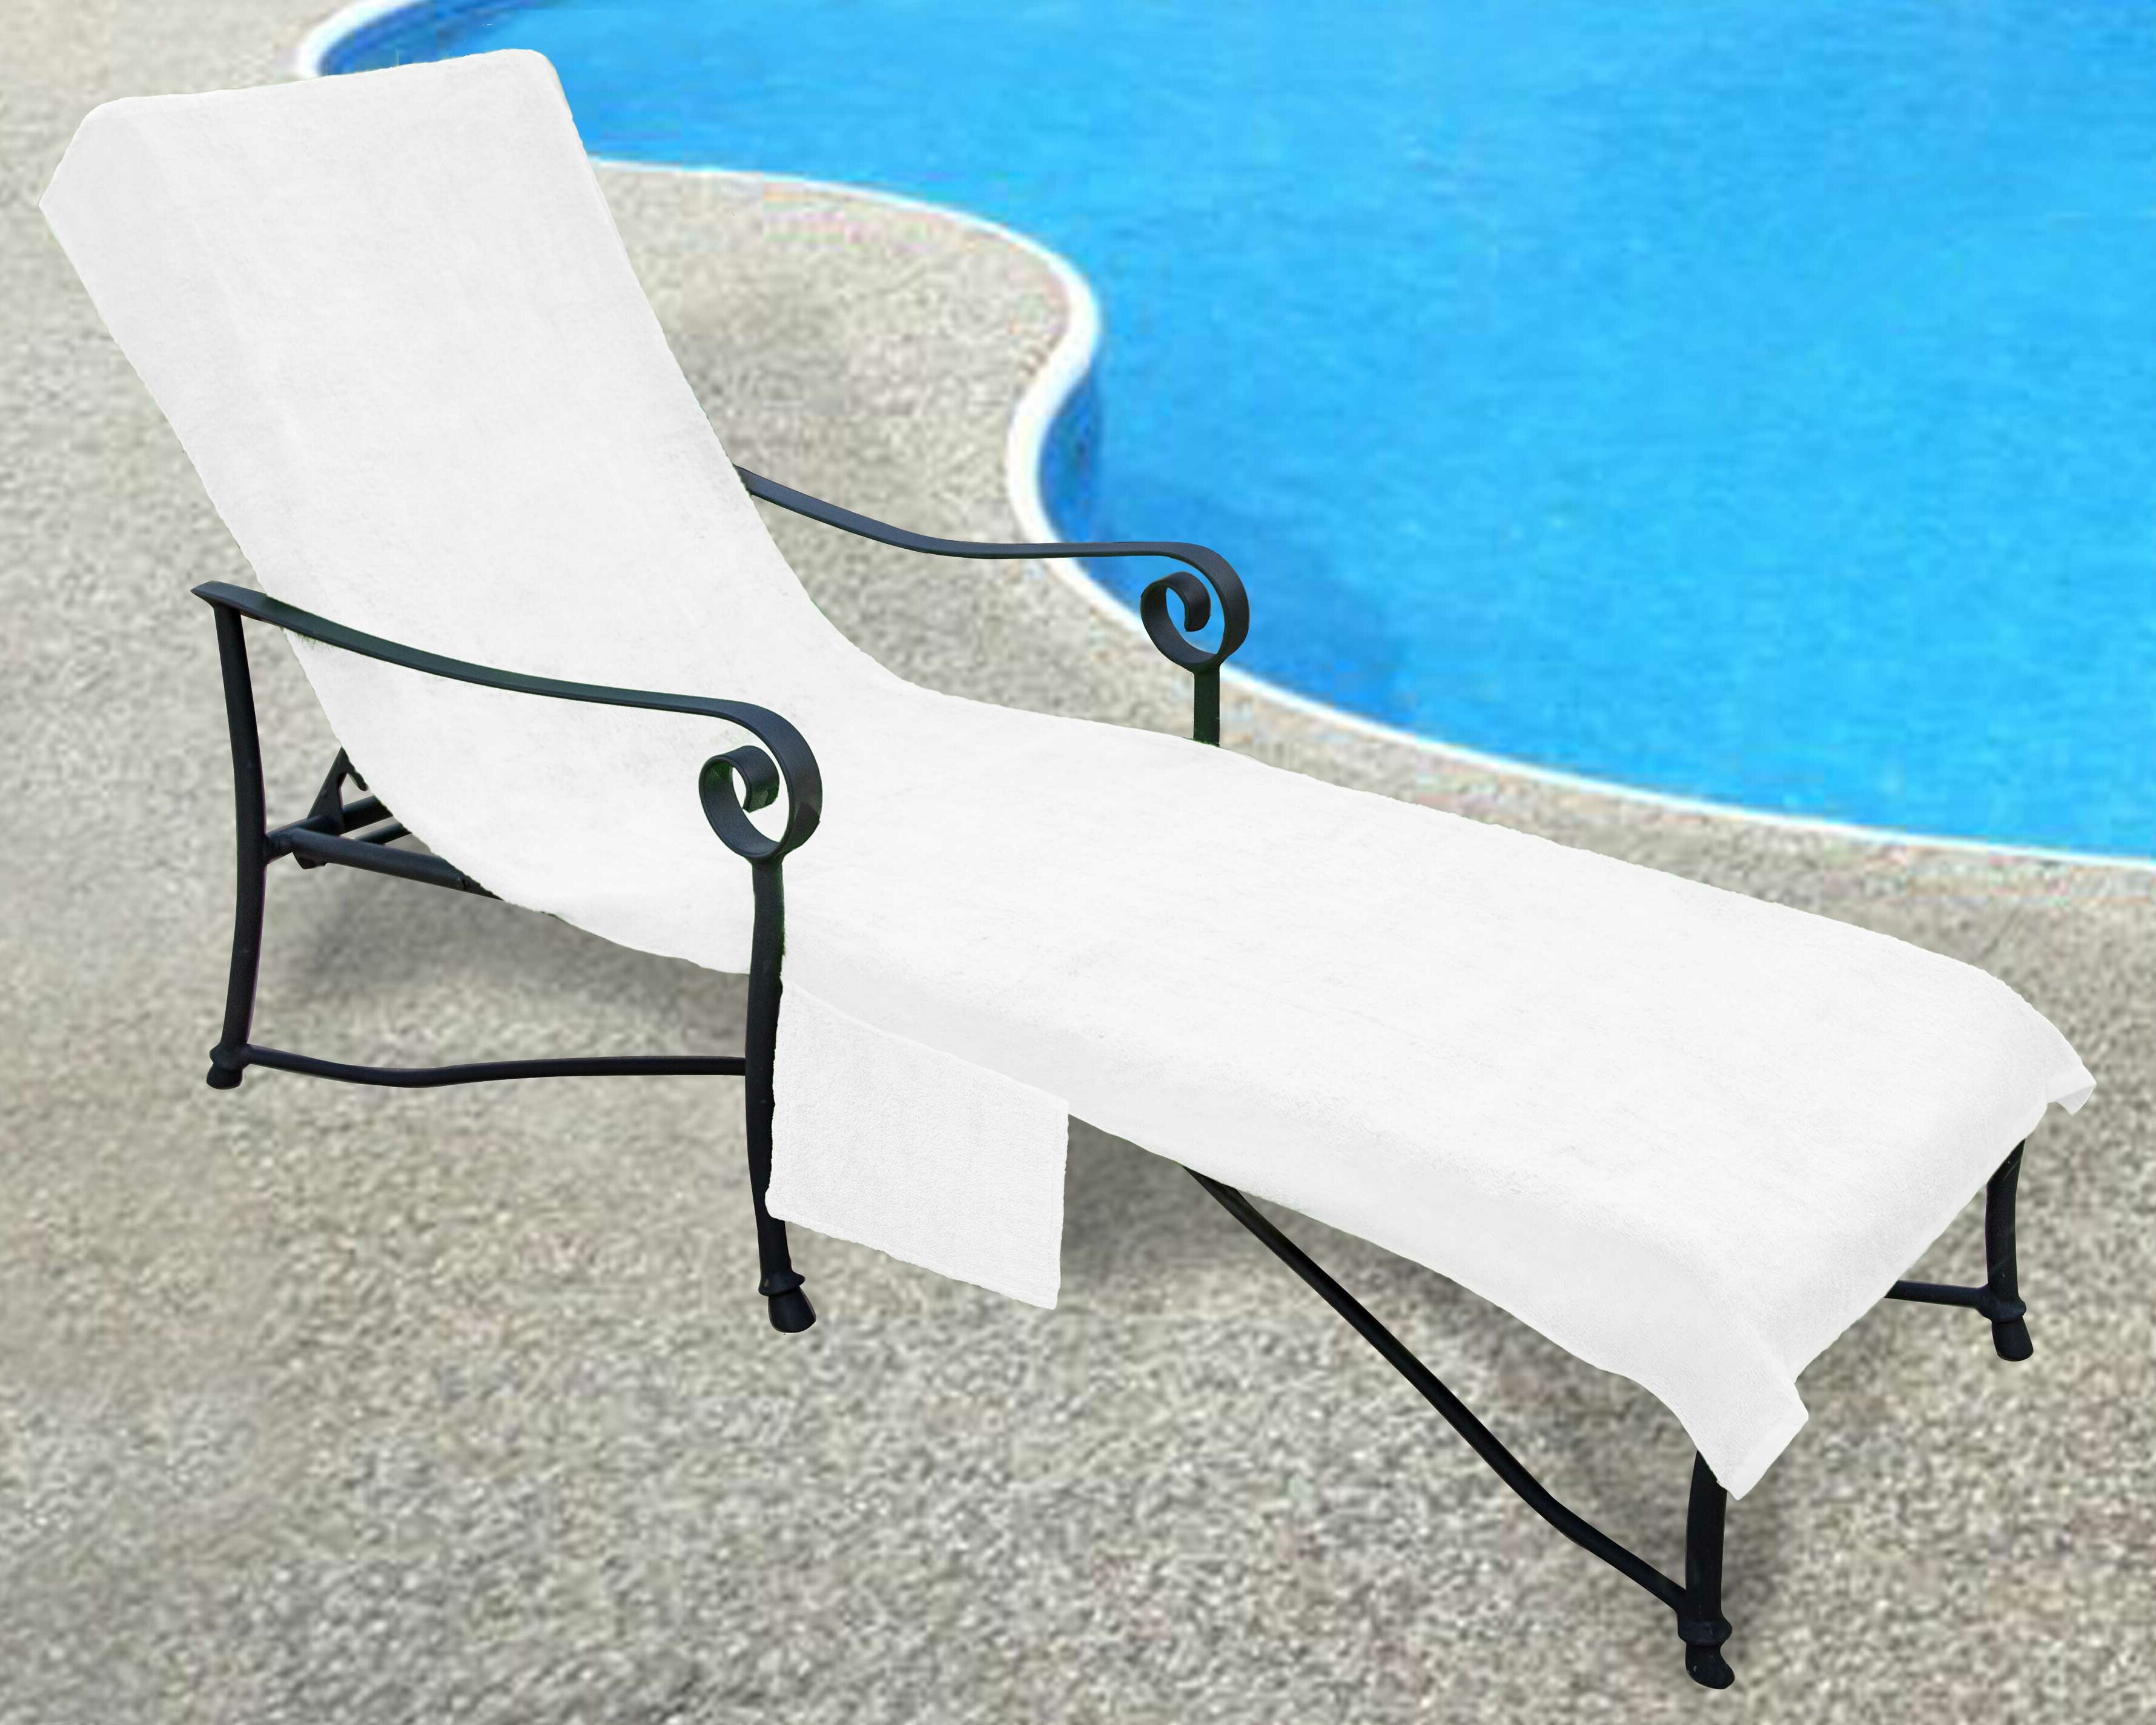 Arlmont Co Patio Chaise Lounge Cover Reviews Wayfair